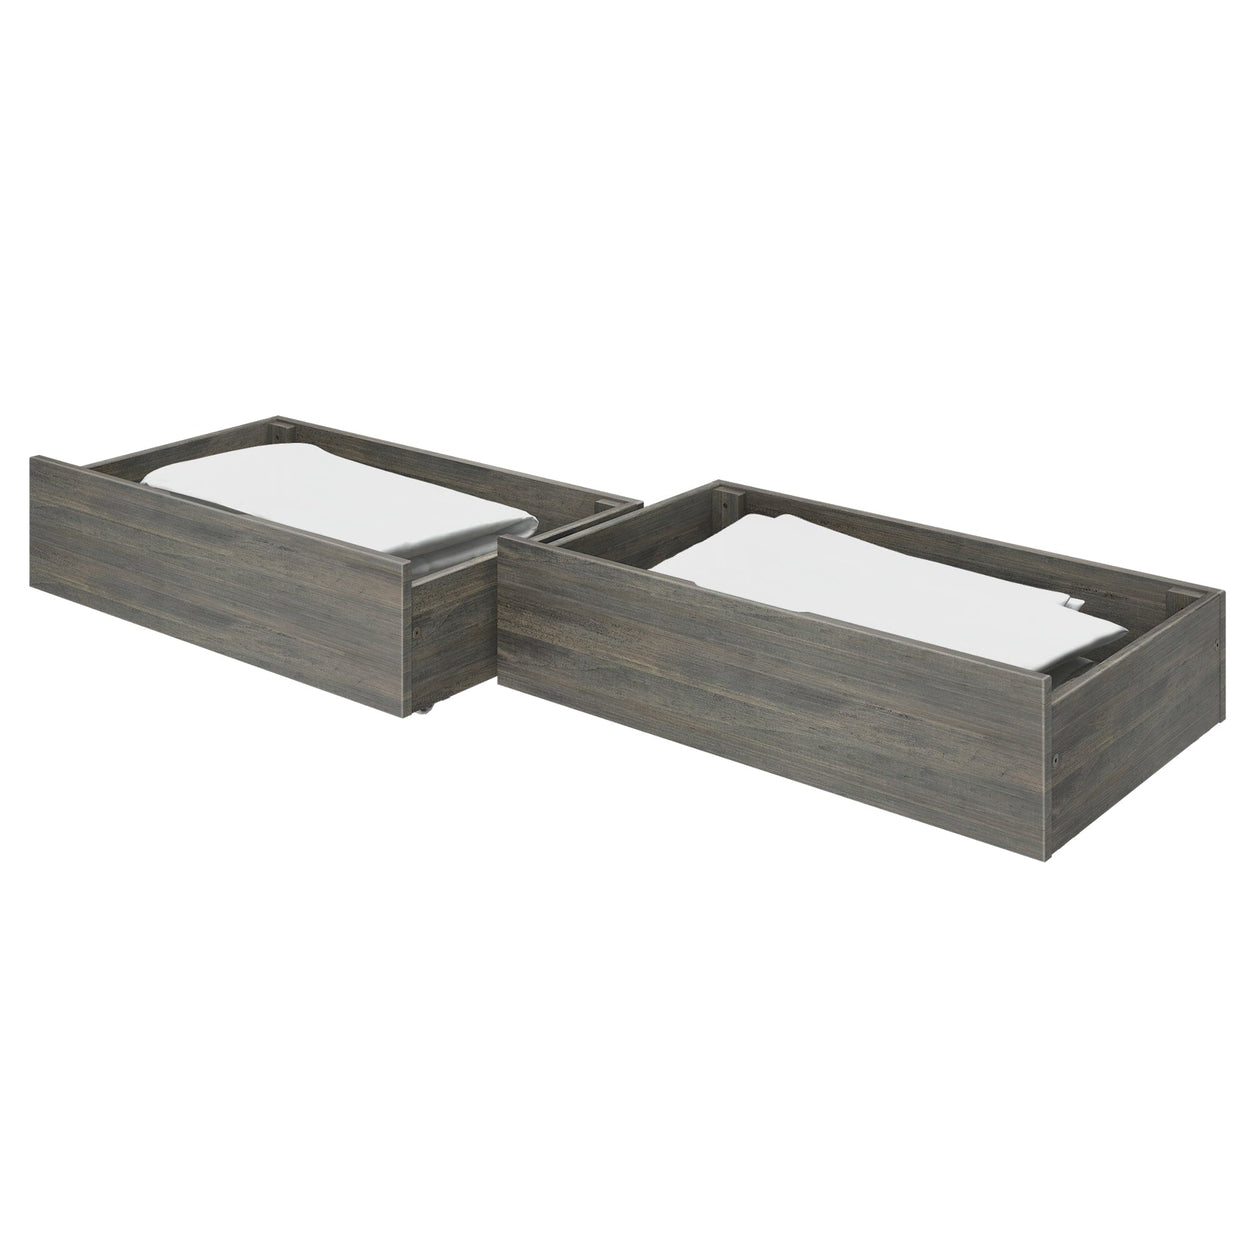 190362-185 : Accessories Farmhouse Full XL & Queen Storage Drawers, Driftwood